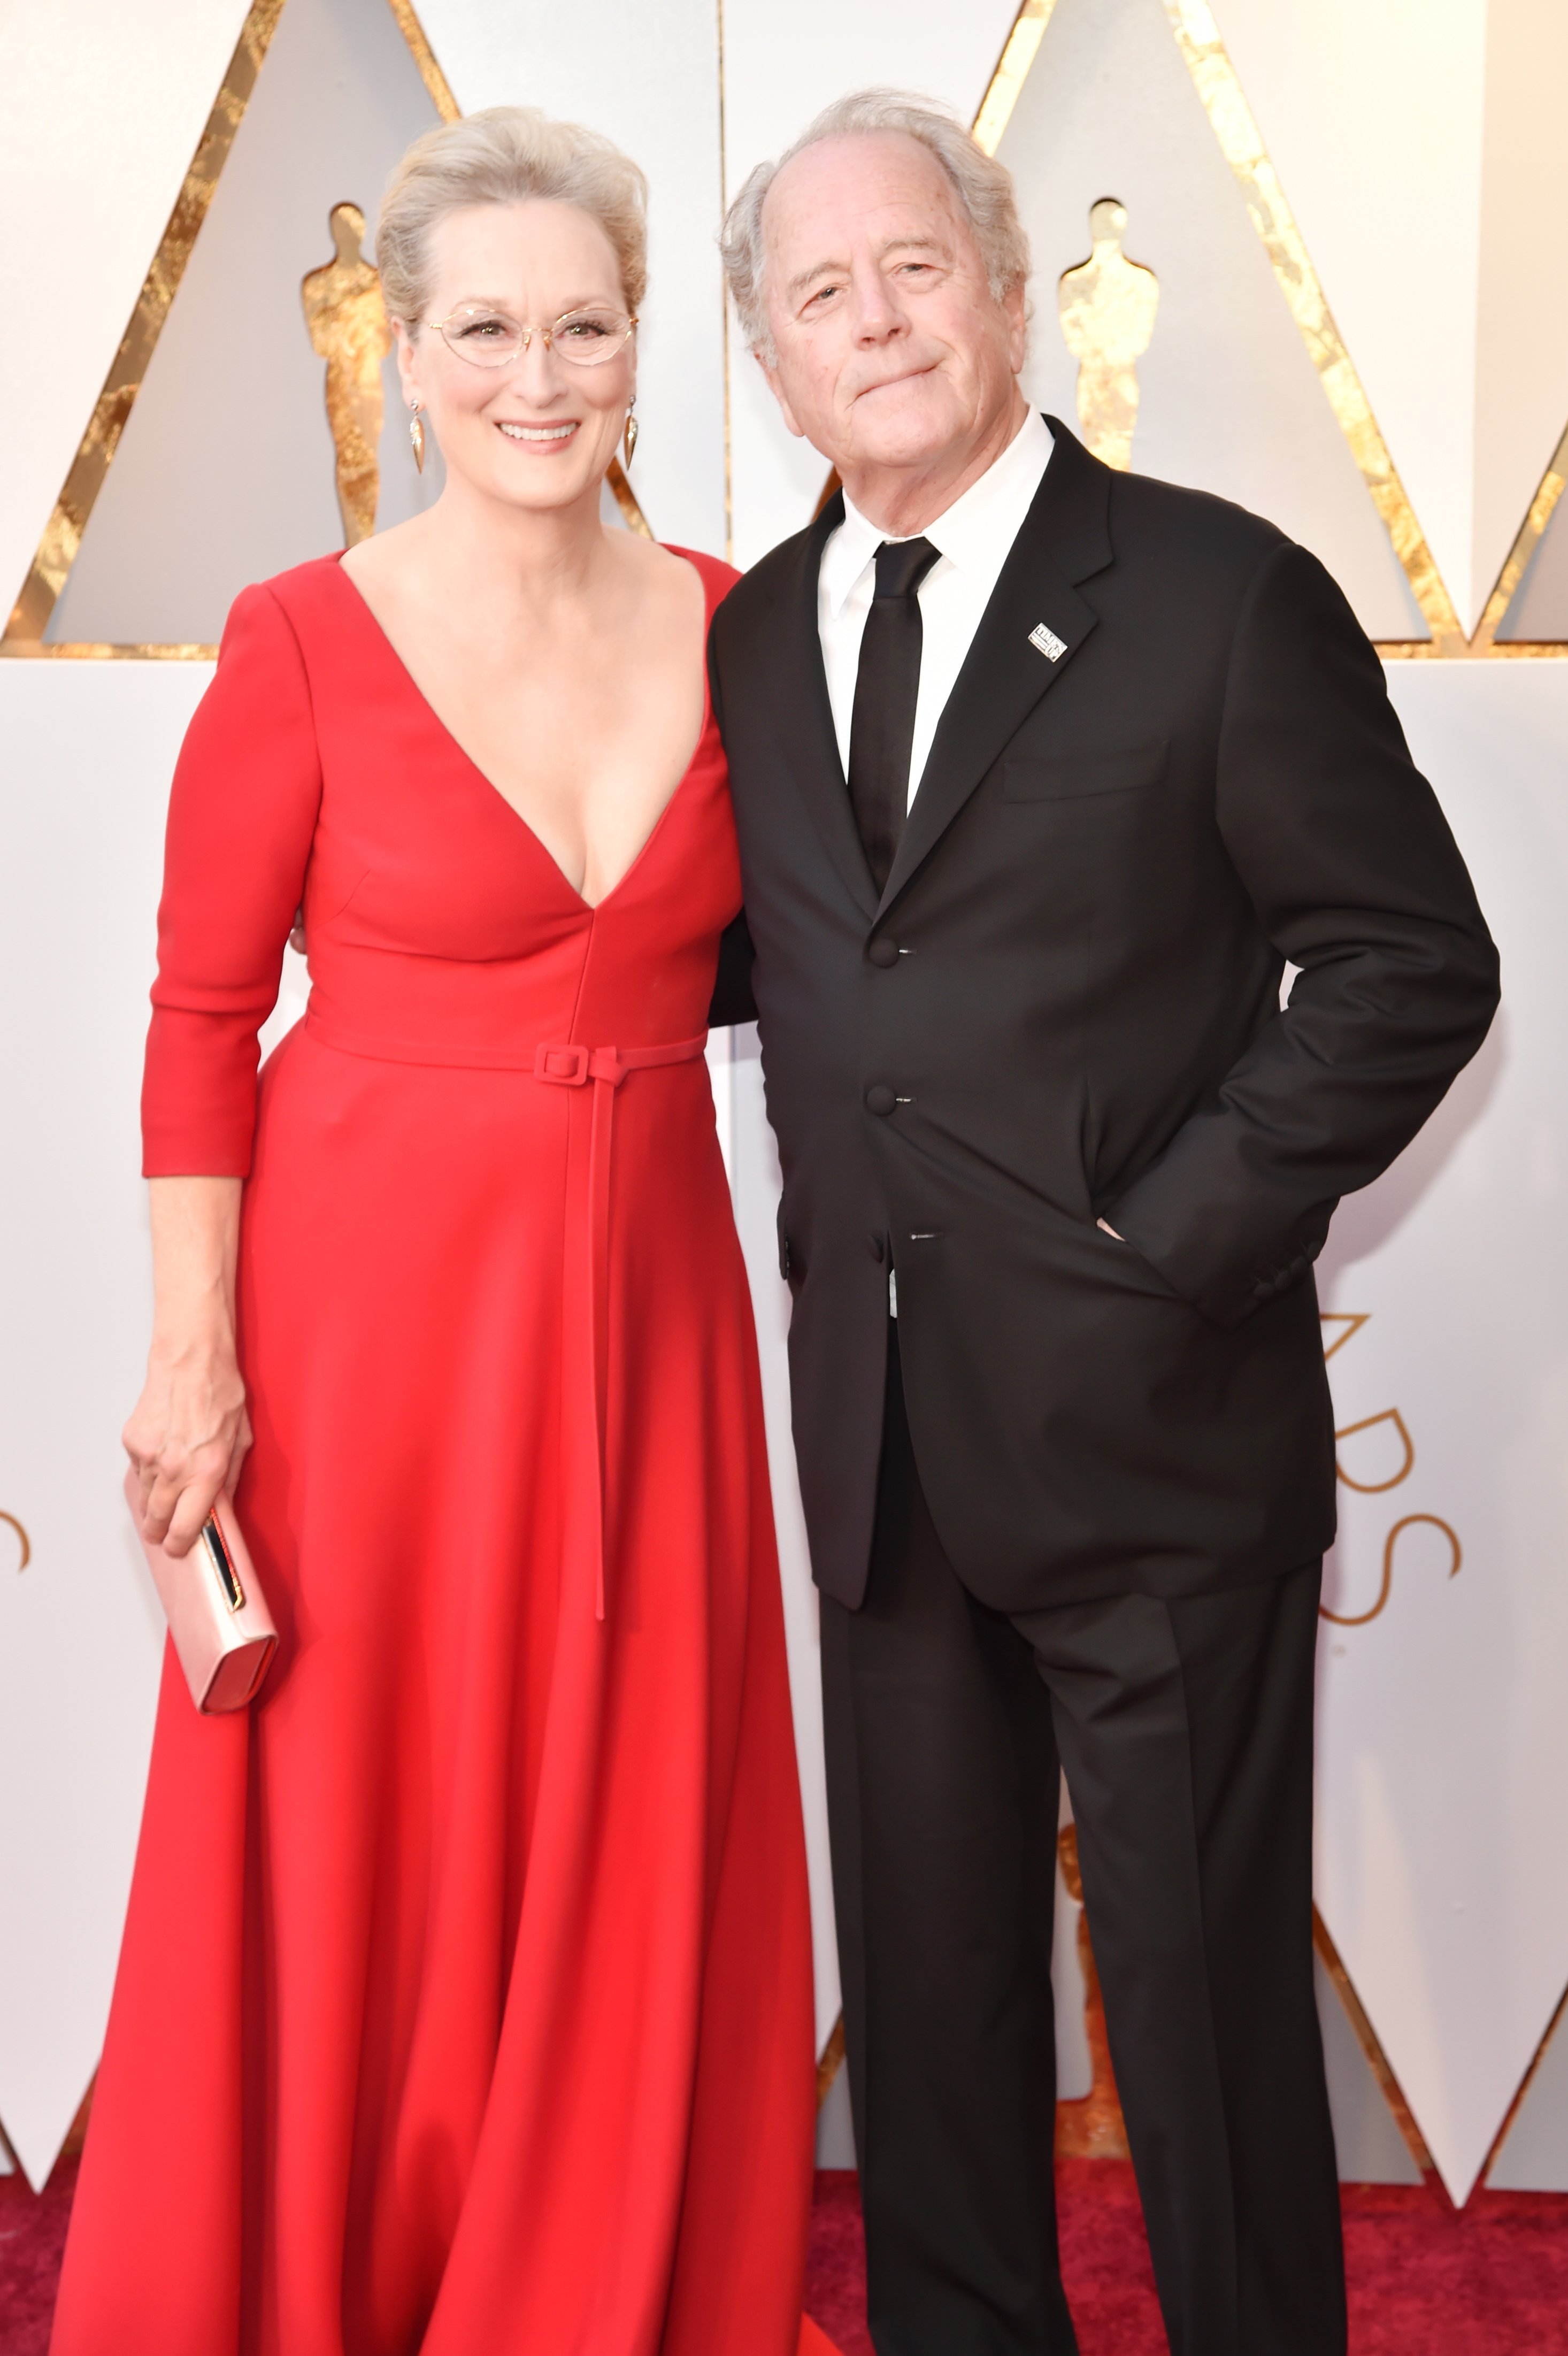 Meryl Streep and Don Gummer attend the 90th Annual Academy Awards at Hollywood & Highland Center on March 4, 2018 in Hollywood, California. | Source: Getty Images